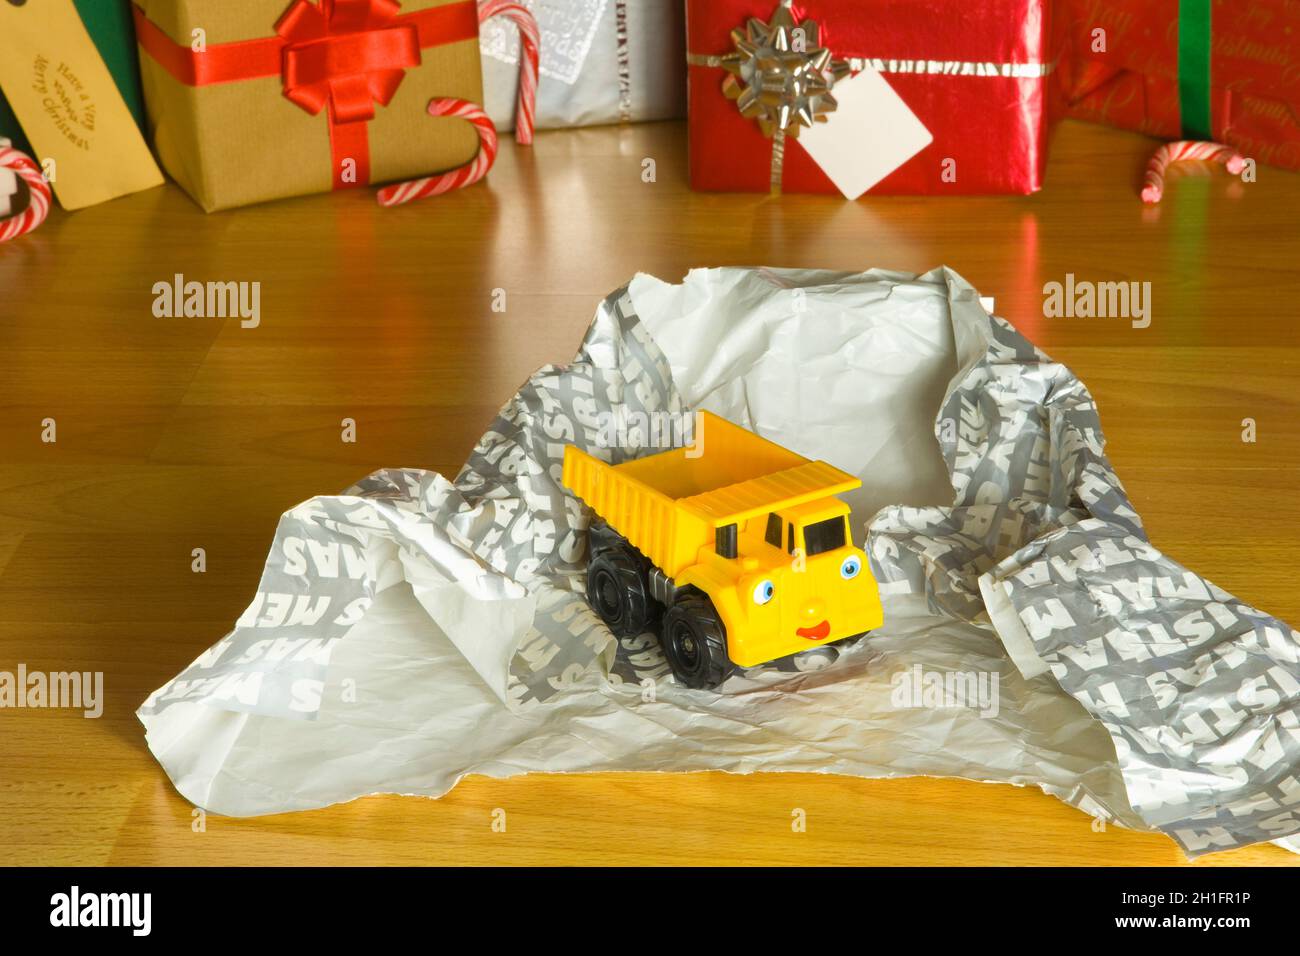 Childrens Toy Christmas present unwrapped Stock Photo